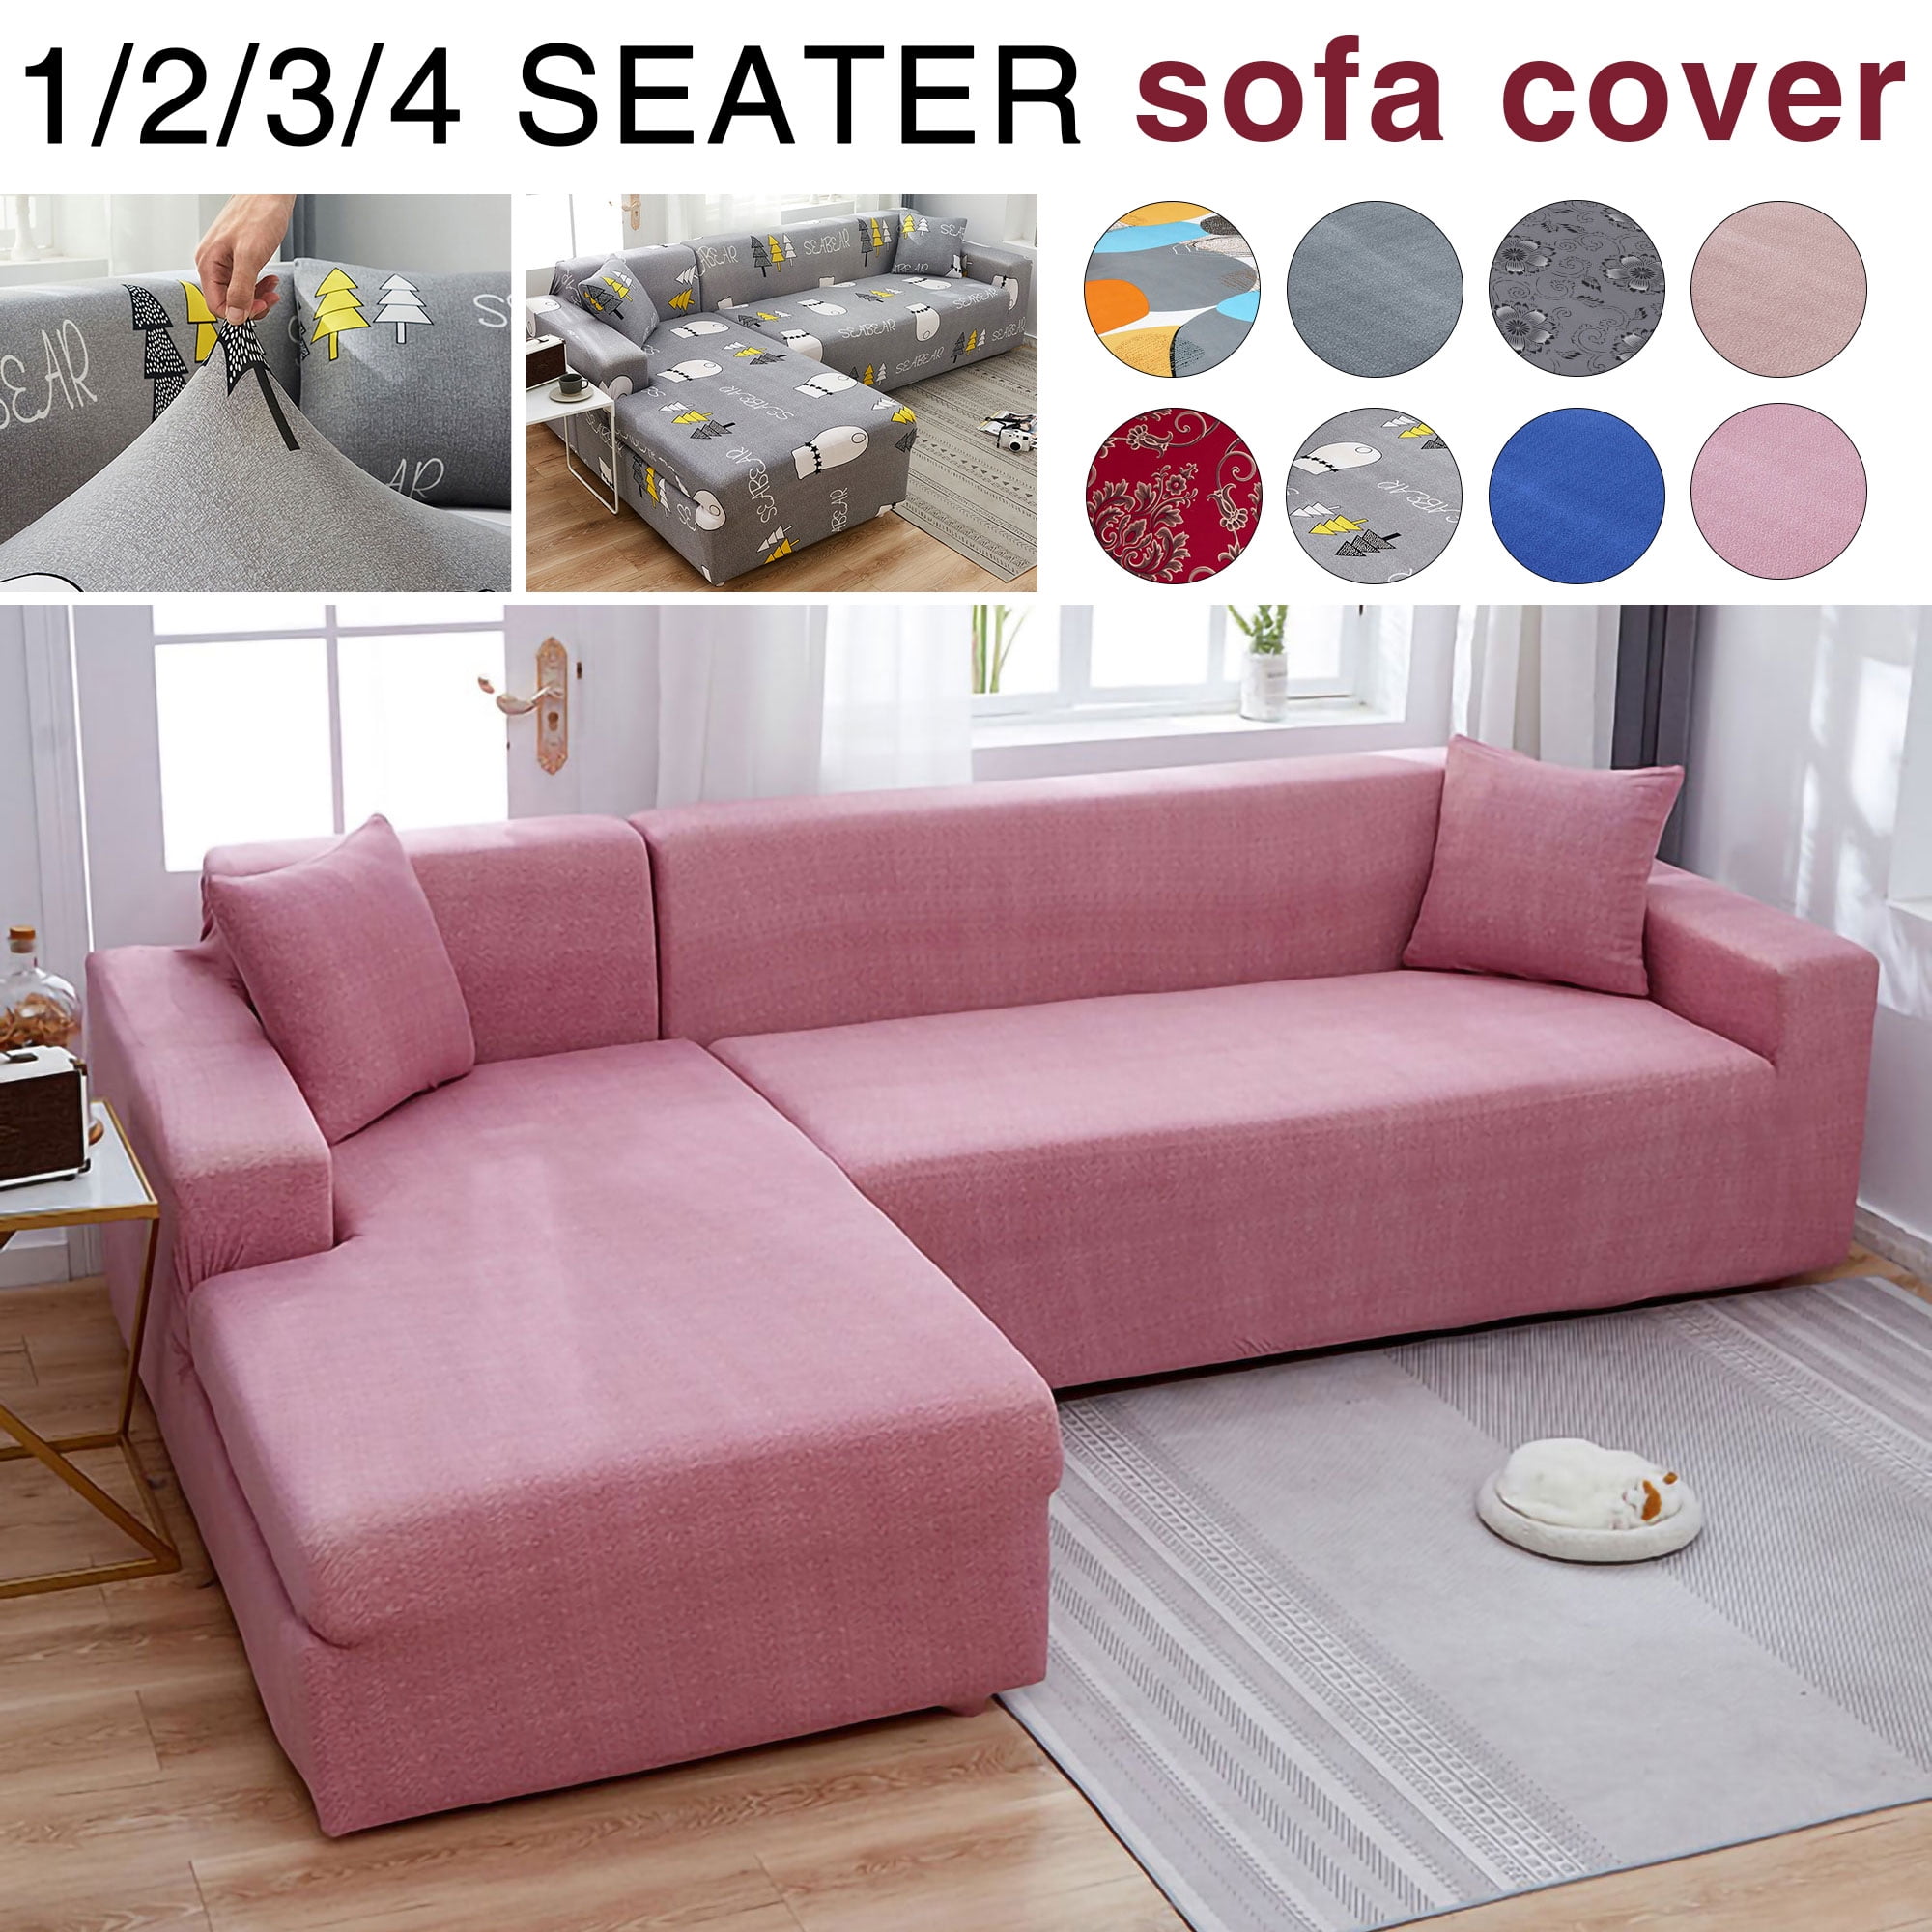 Details about   Waterproof Elastic Sofa Cover 1-4 Seat Slipcover Corner Sectional Couch Protect 